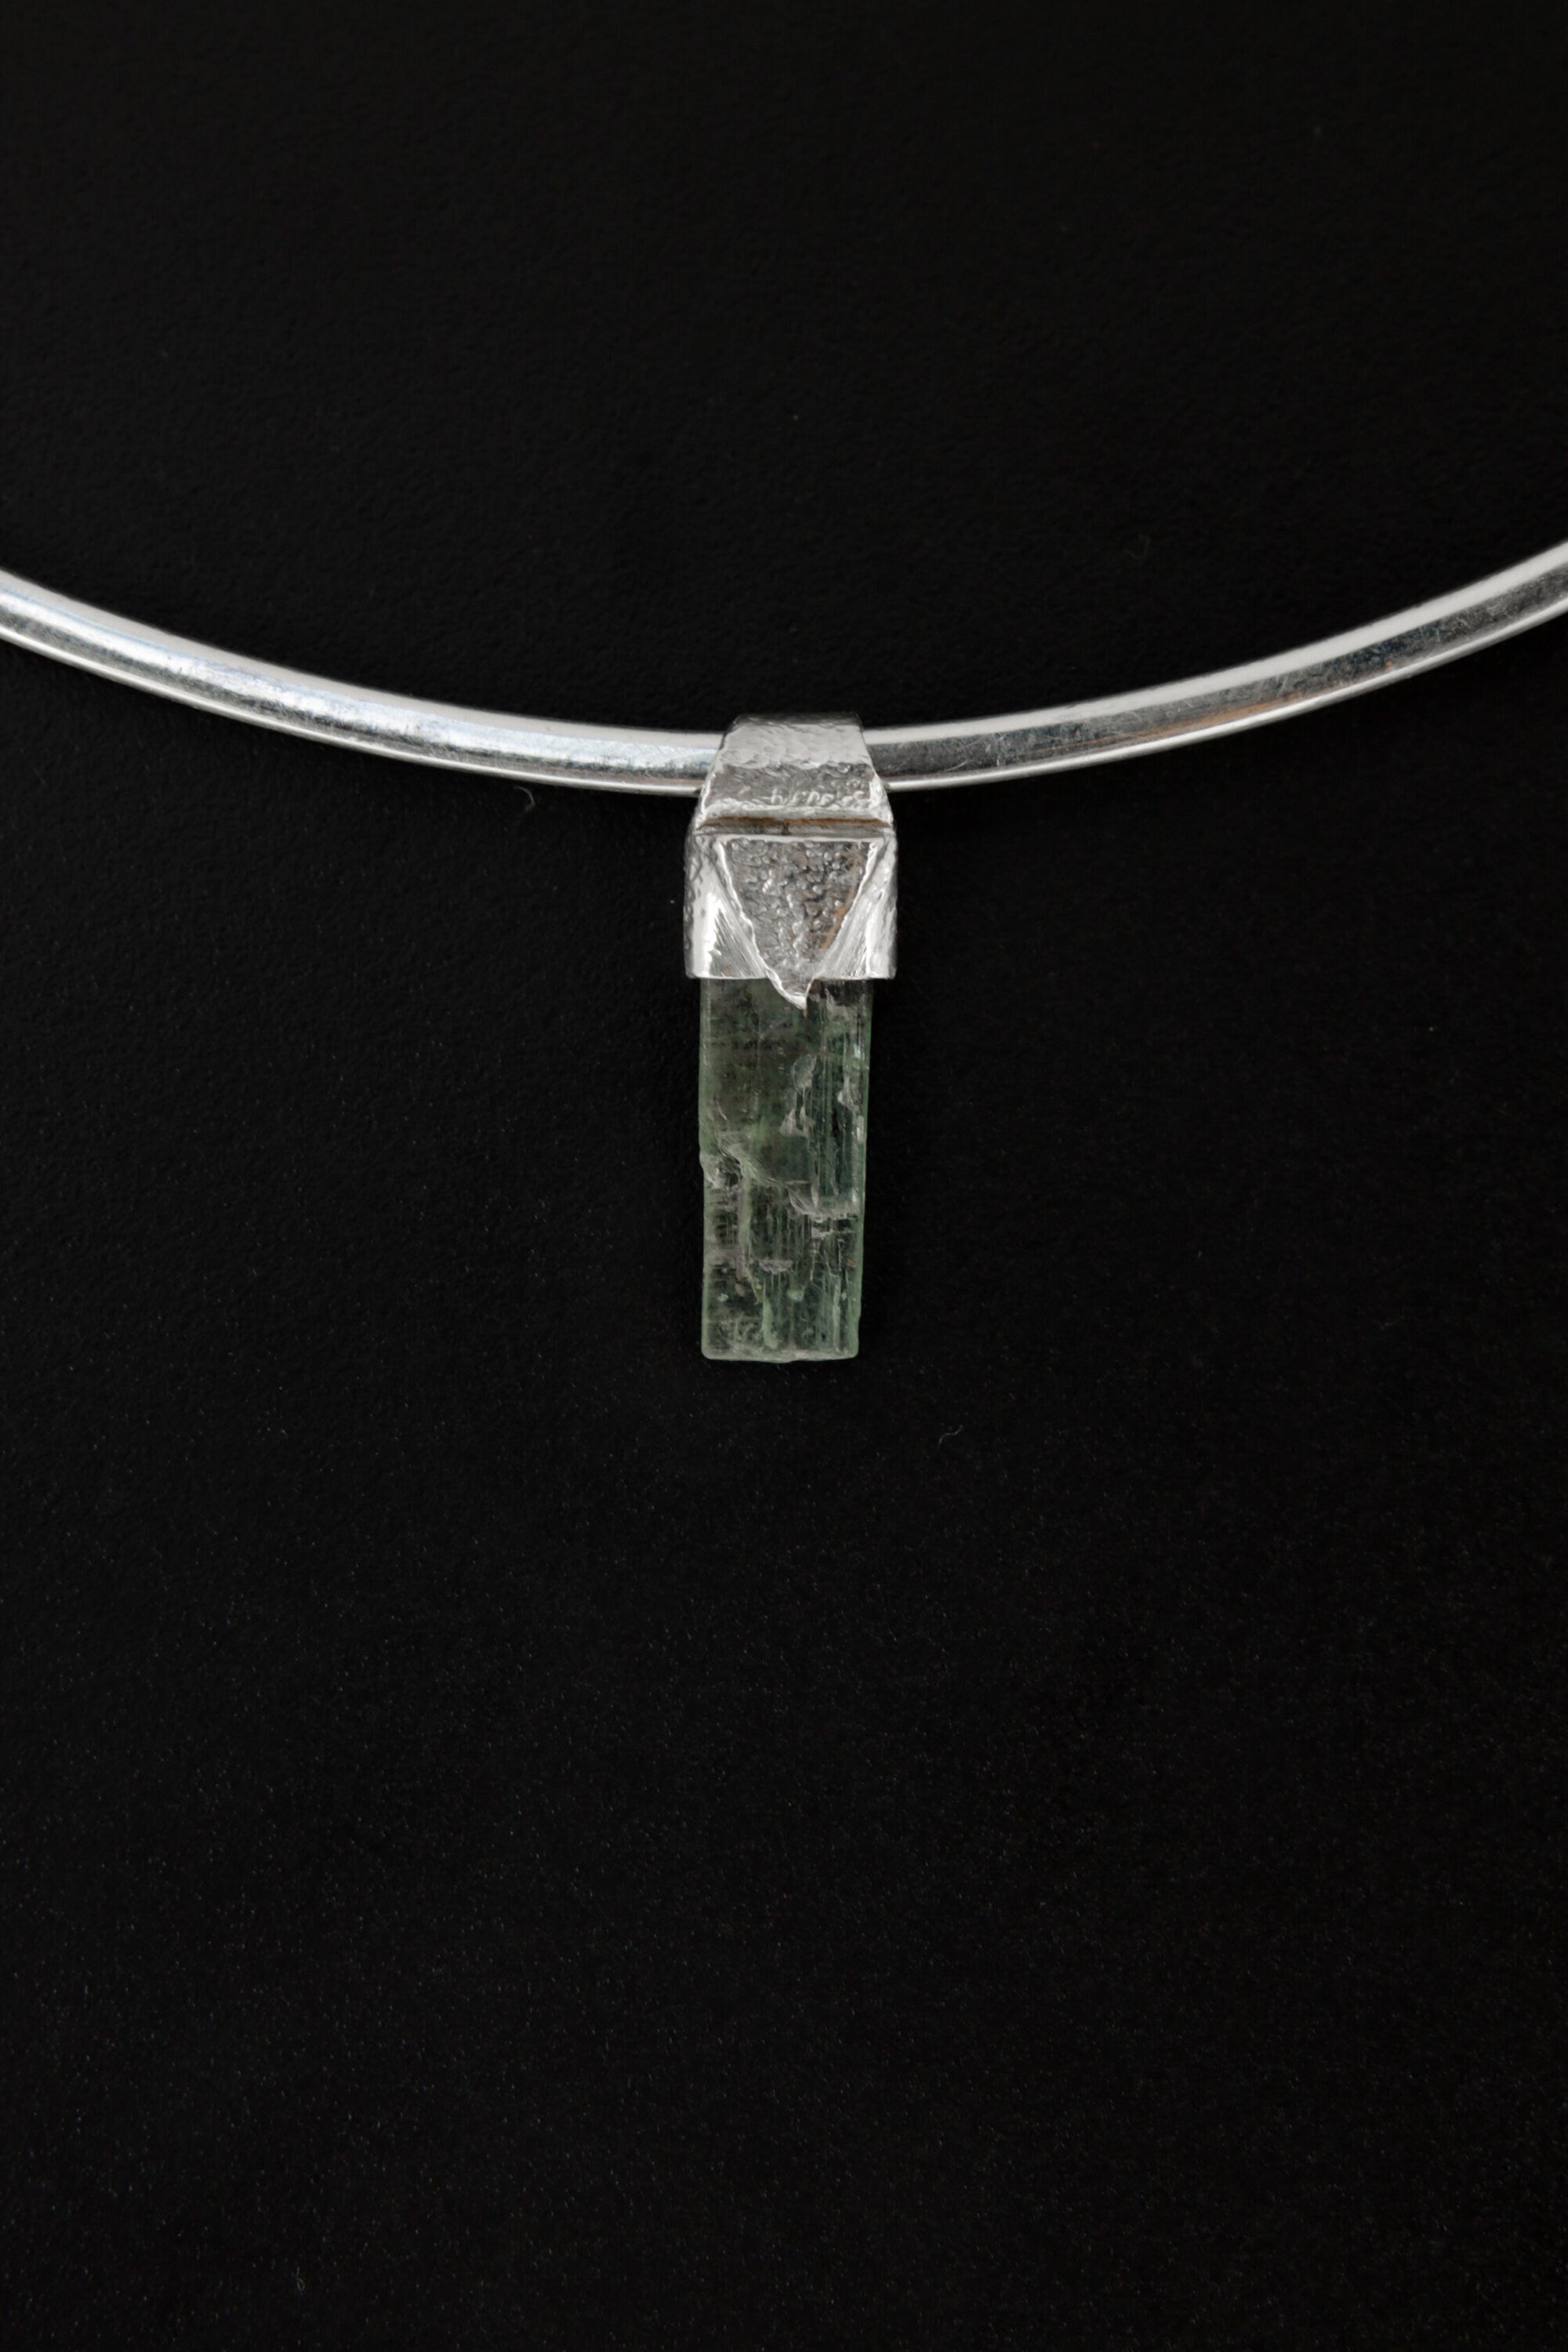 Small Natural Gem Aquamarine - Stack Pendant - Organic Textured 925 Sterling Silver - Crystal Necklace